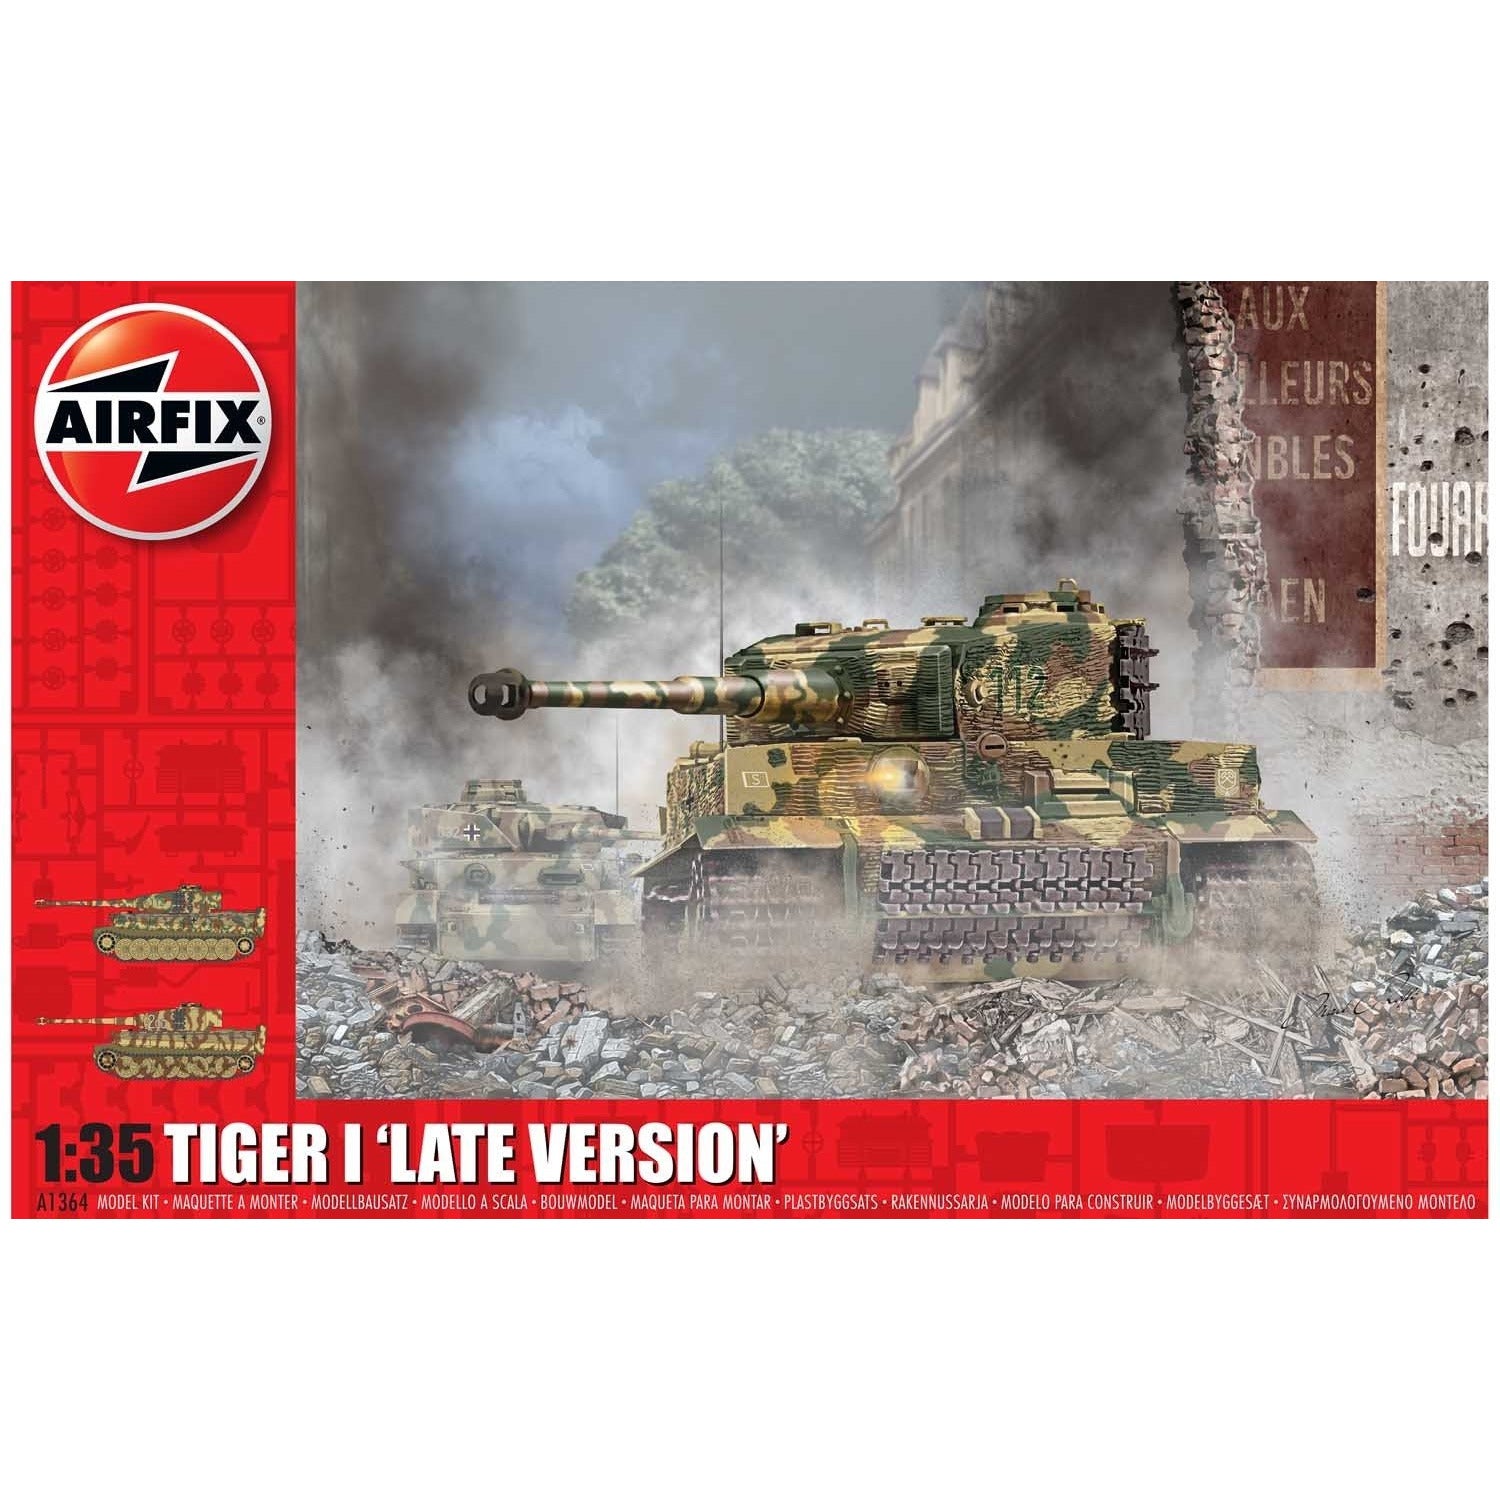 Tiger I "Late Version" 1/35 by Airfix